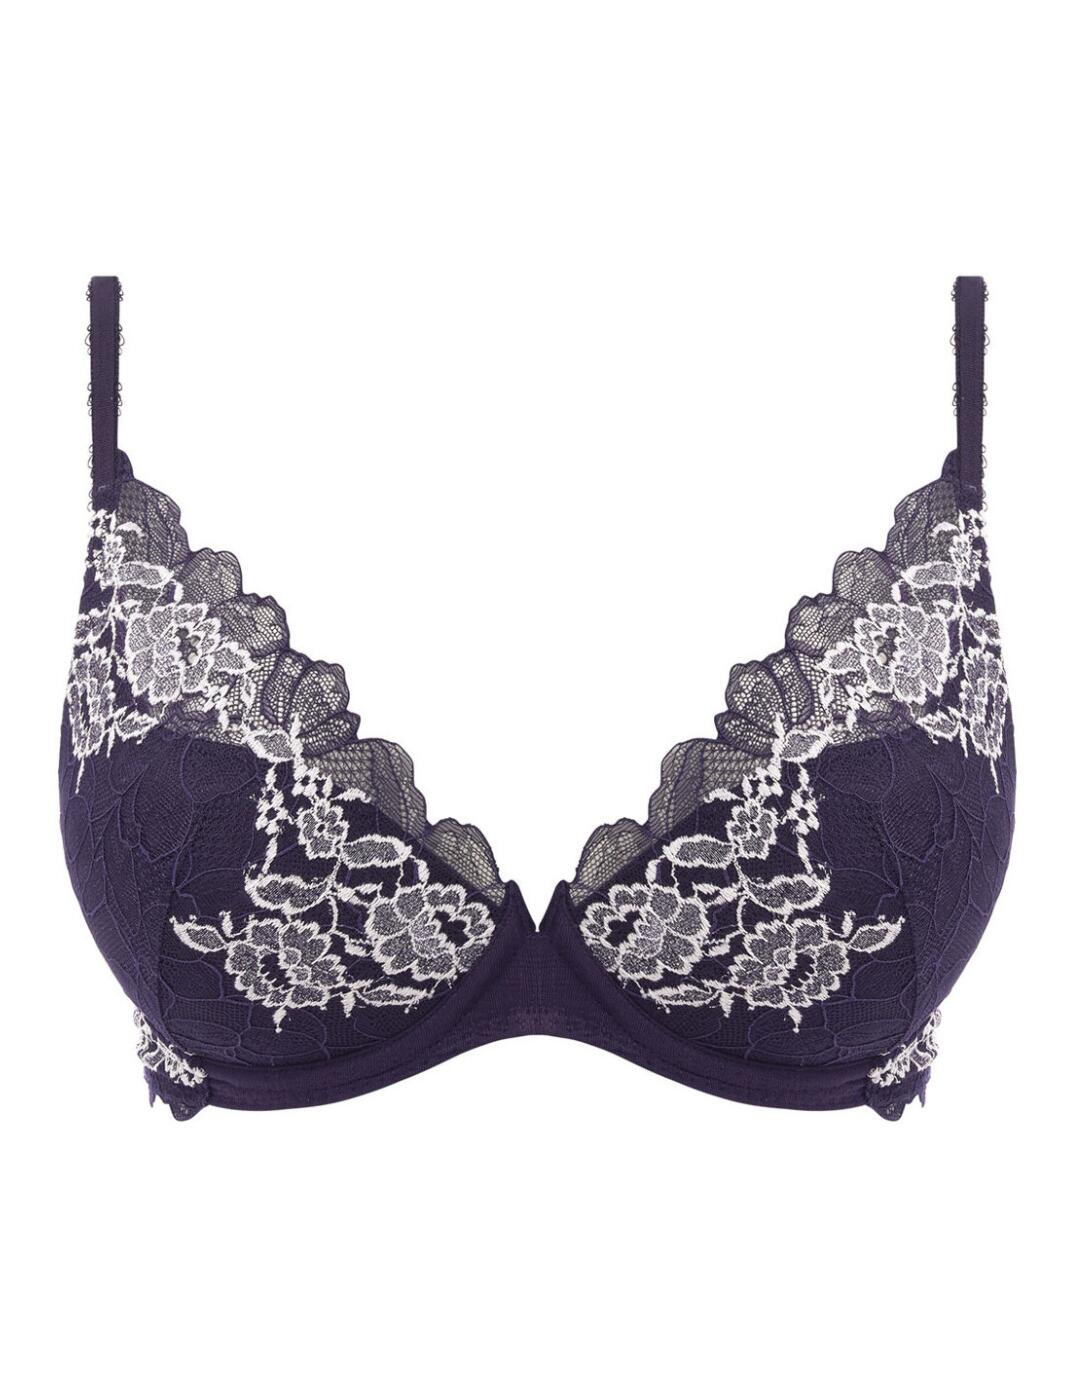 Wacoal Lace Perfection Underwired Plunge Bra - Belle Lingerie